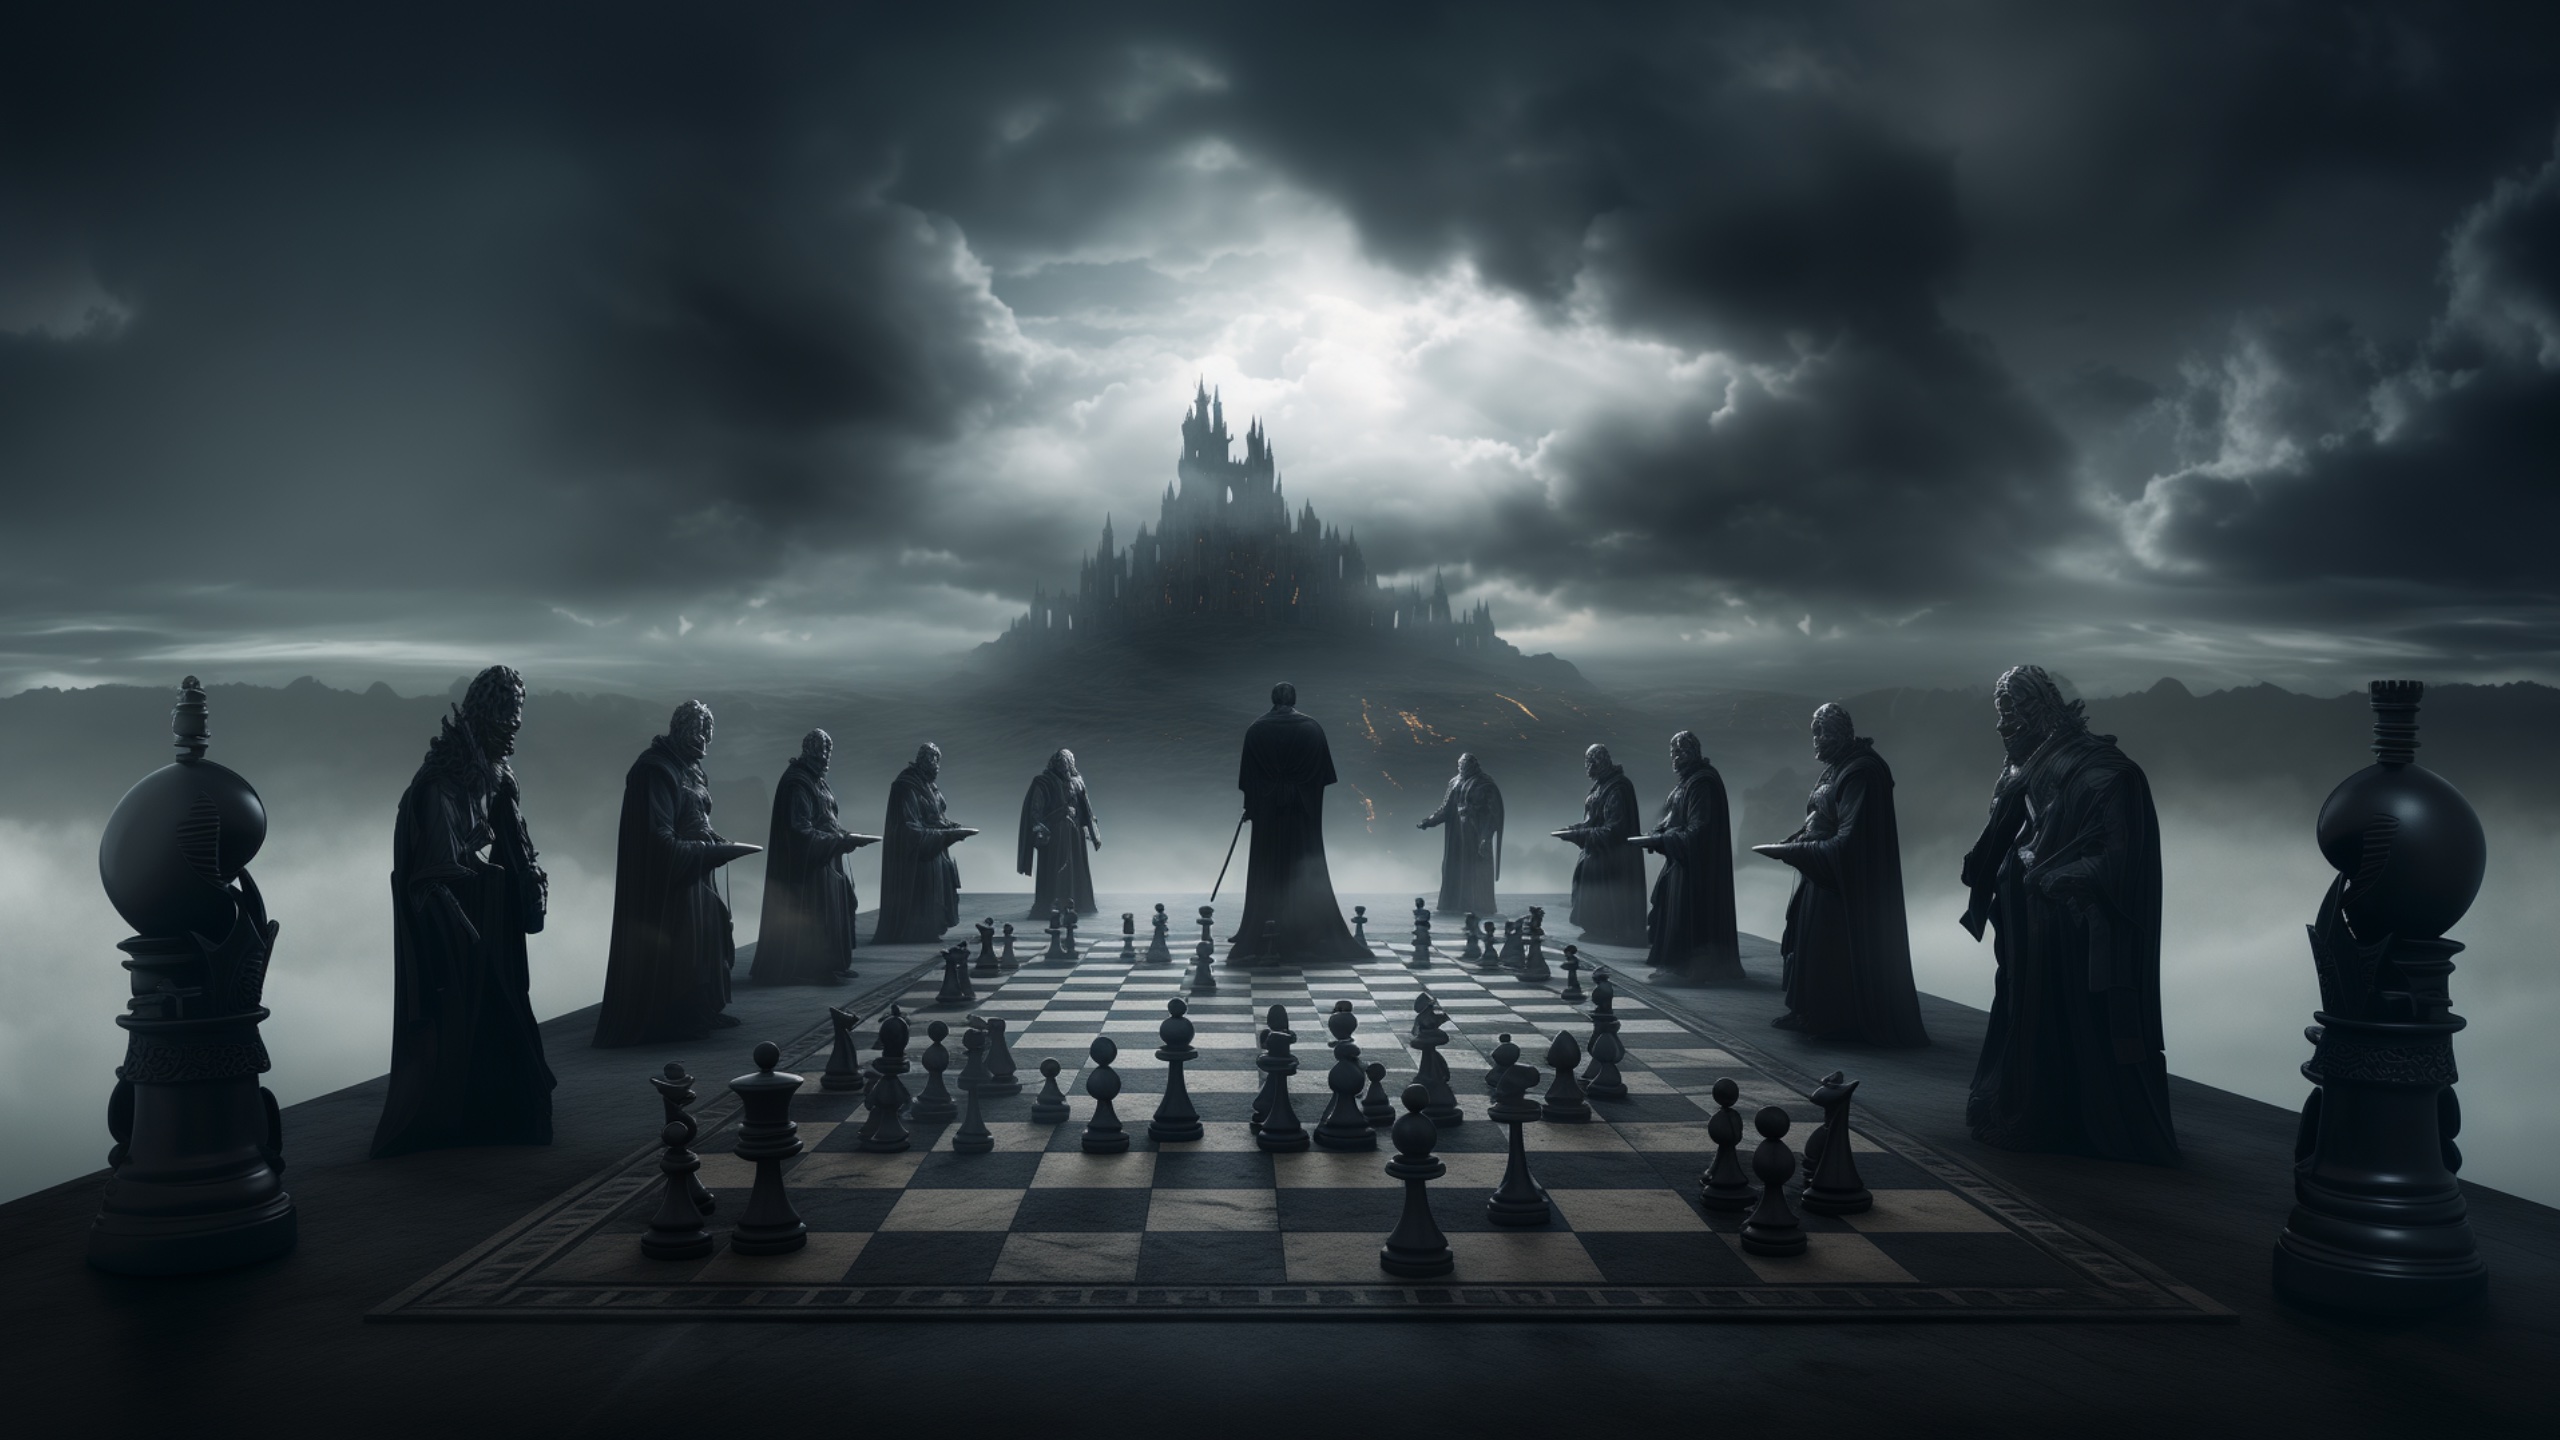 Immortal Game is building a web3 chess platform